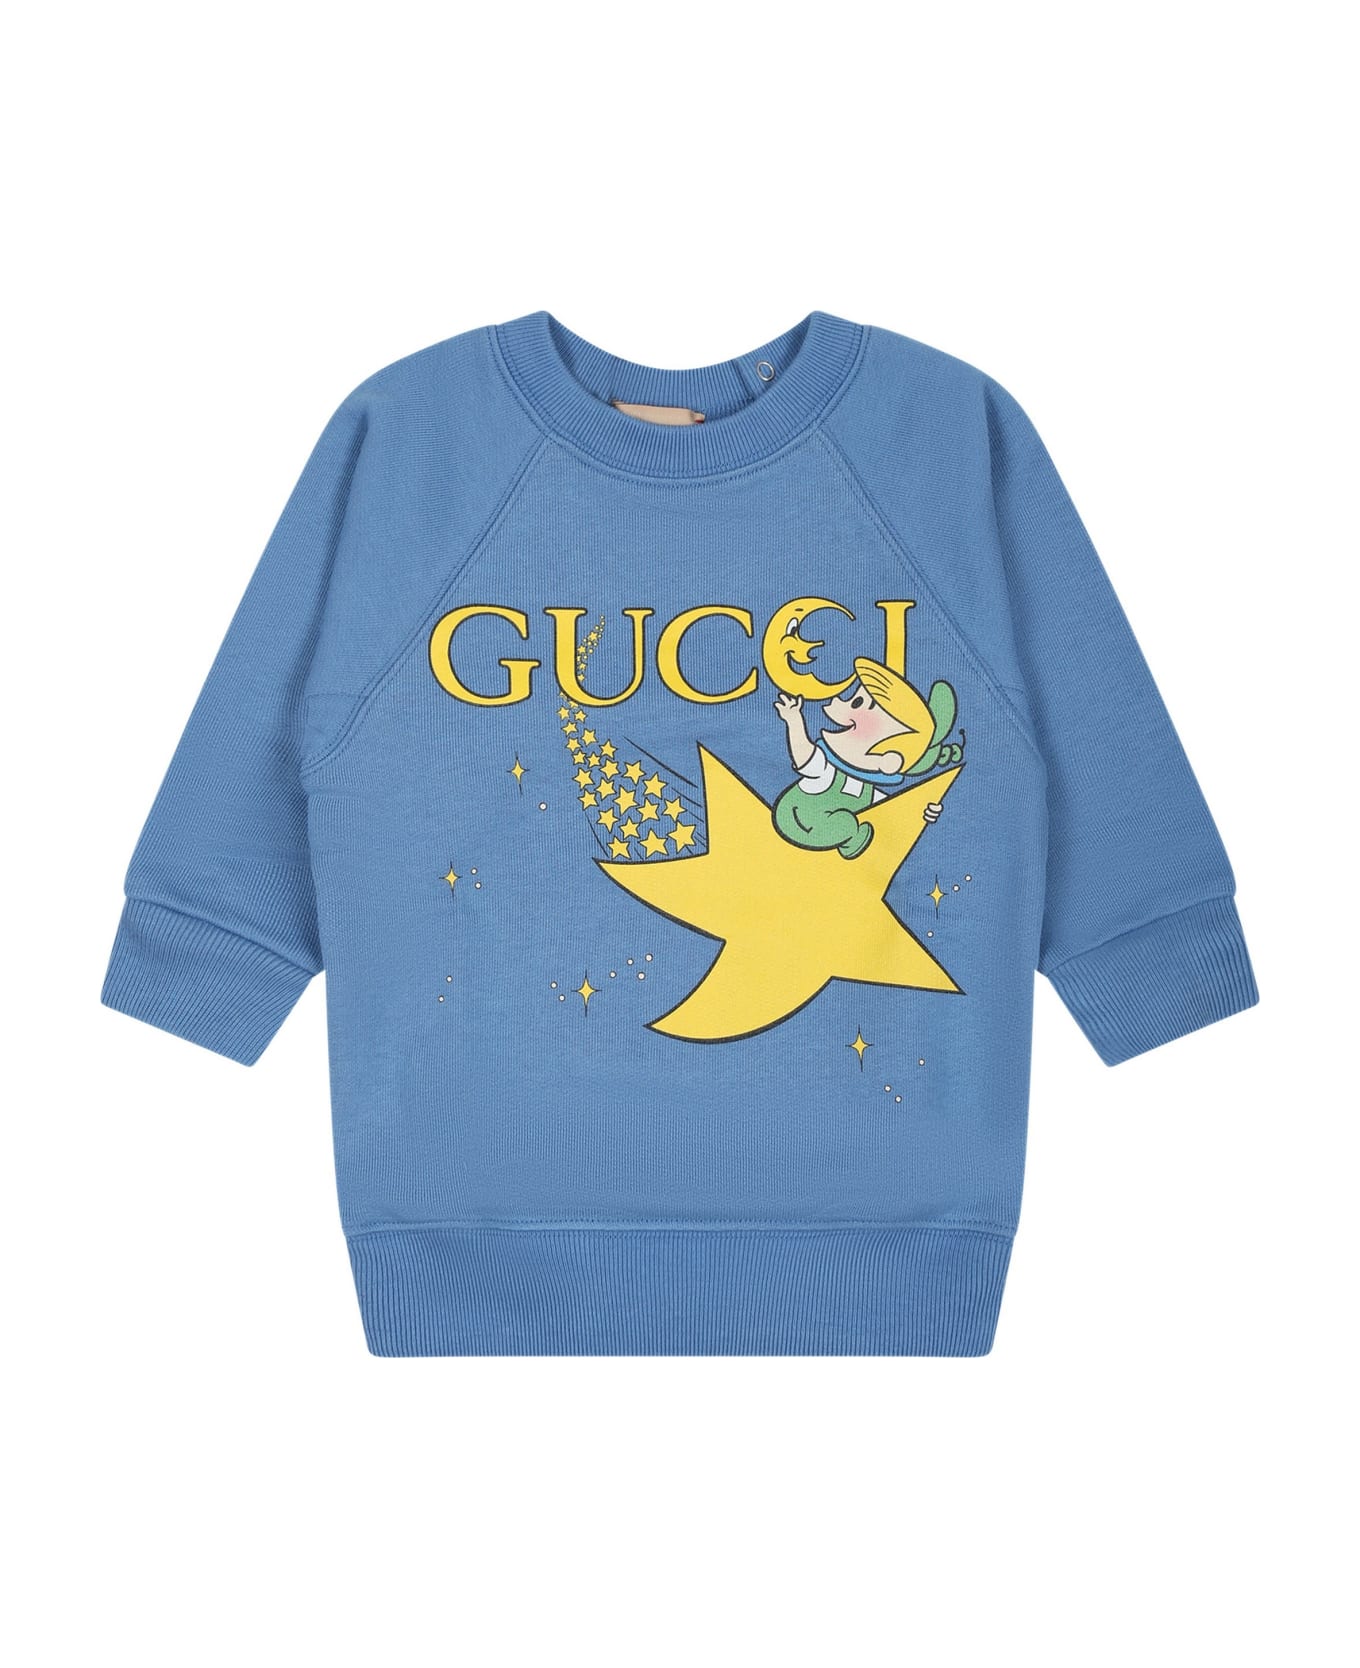 Gucci Light Blue Sweatshirt For Baby Kids With Print And Logo - Light Blue